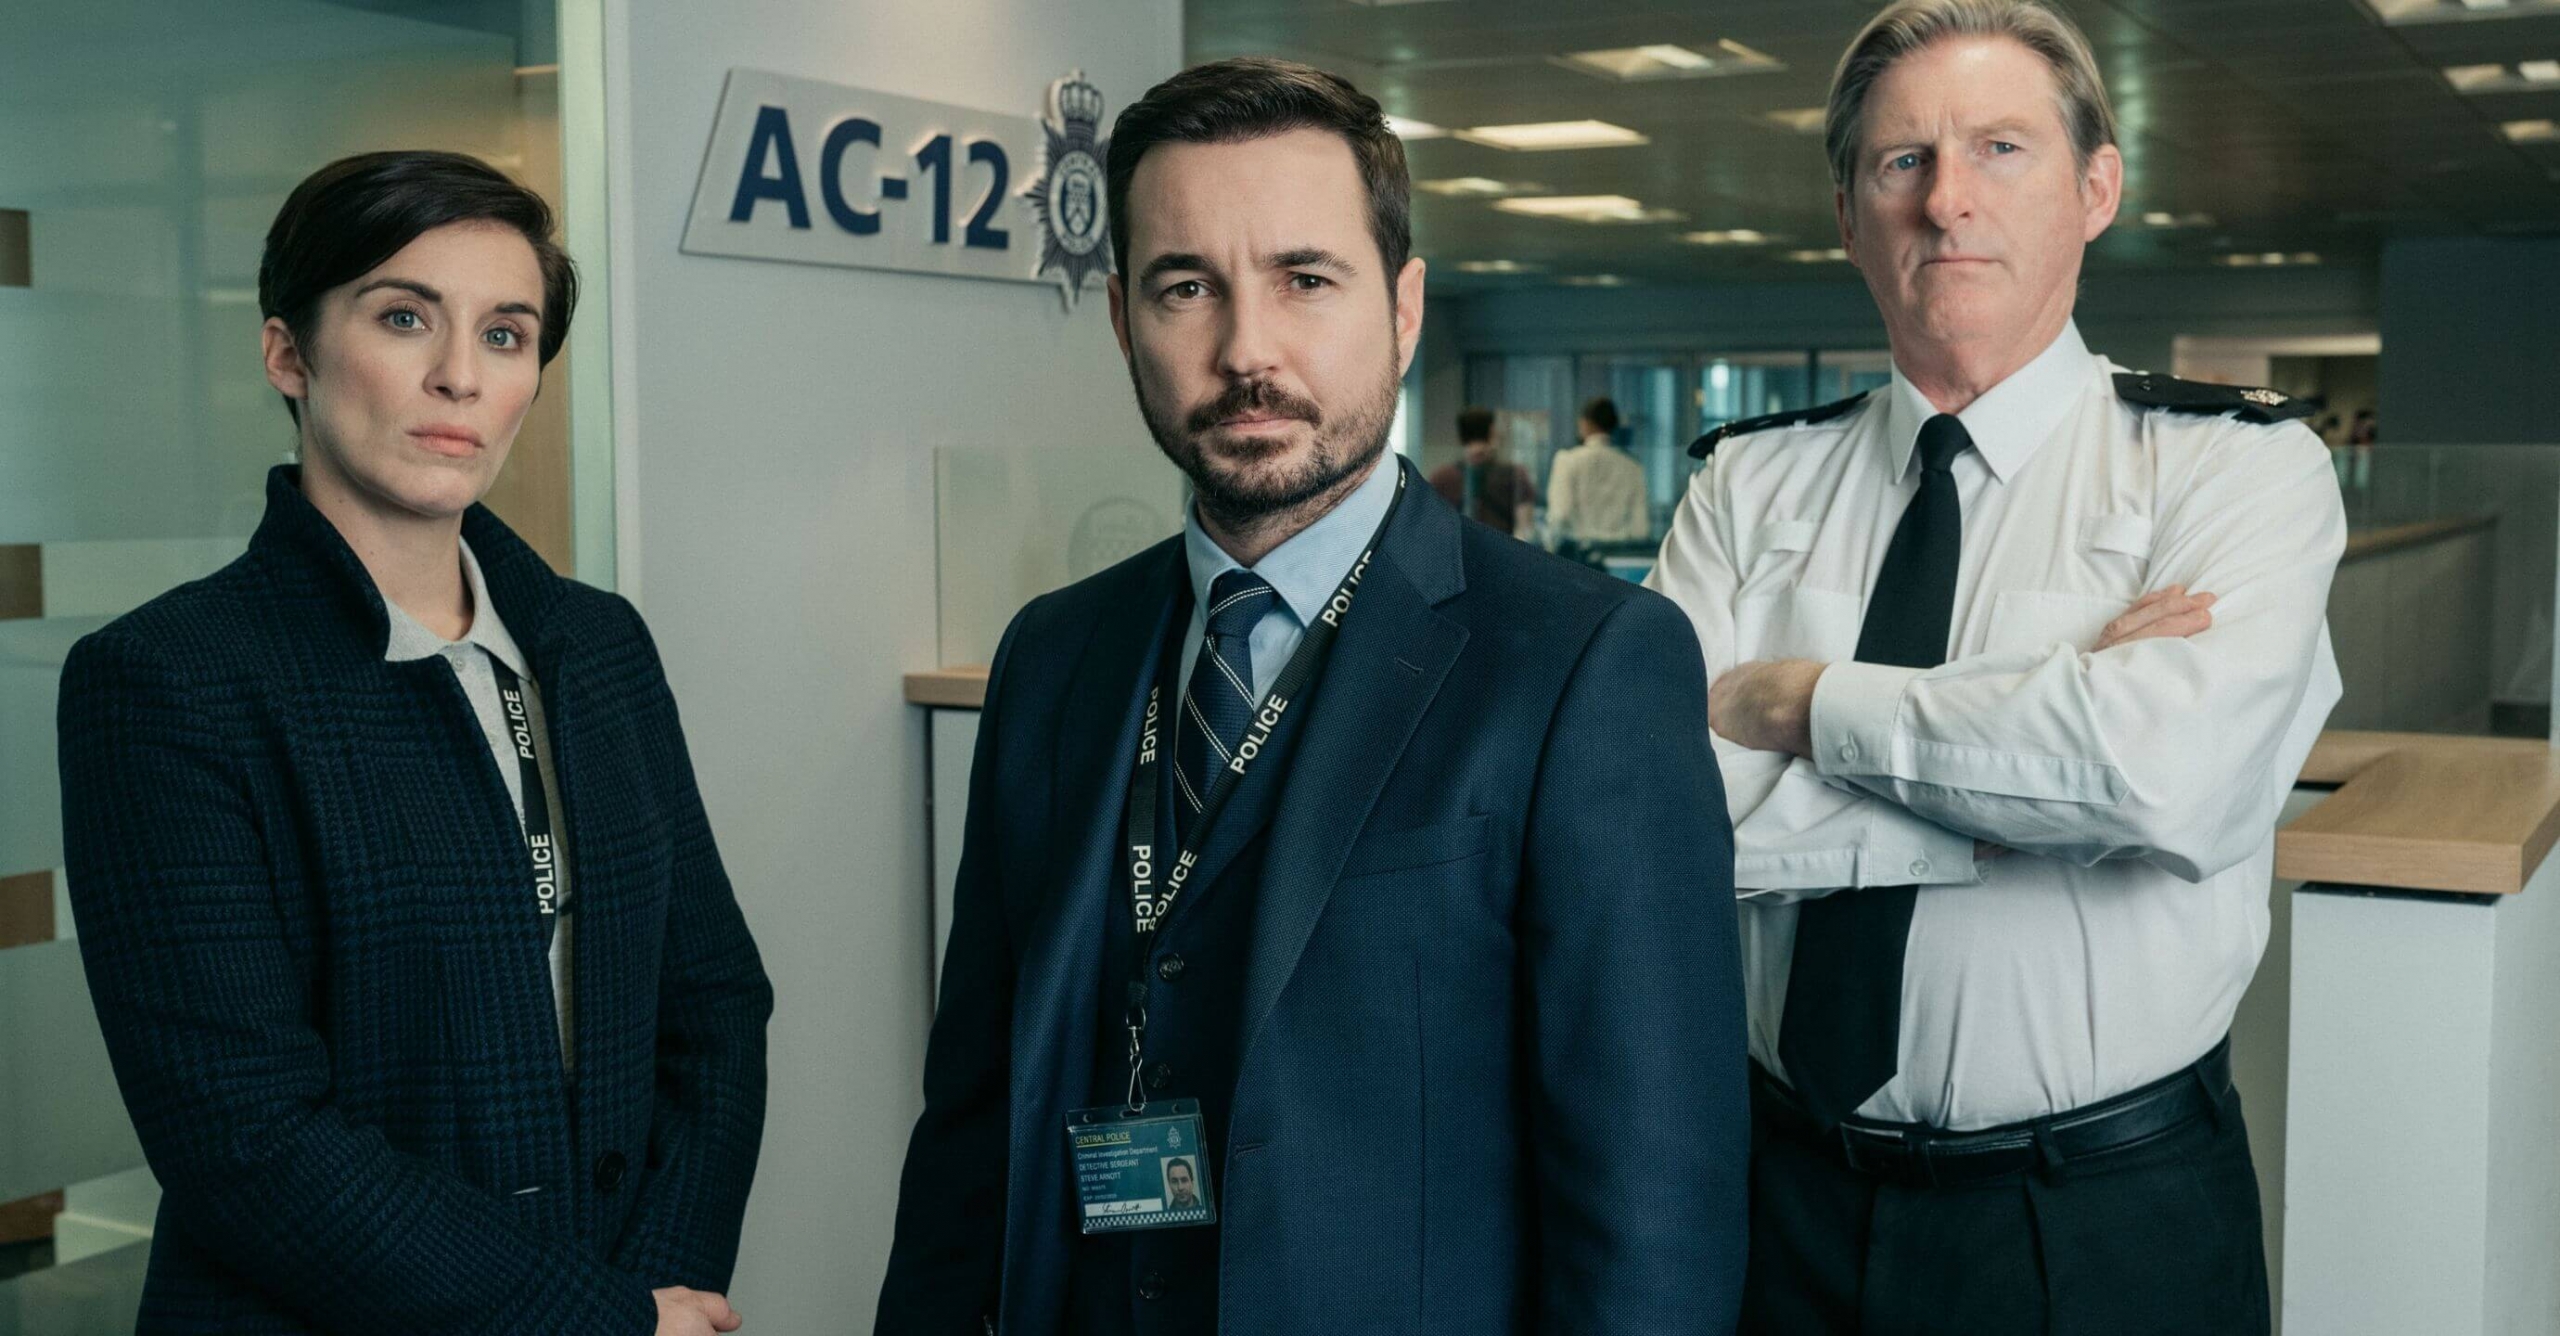 Line of duty police cast looking towards the camera